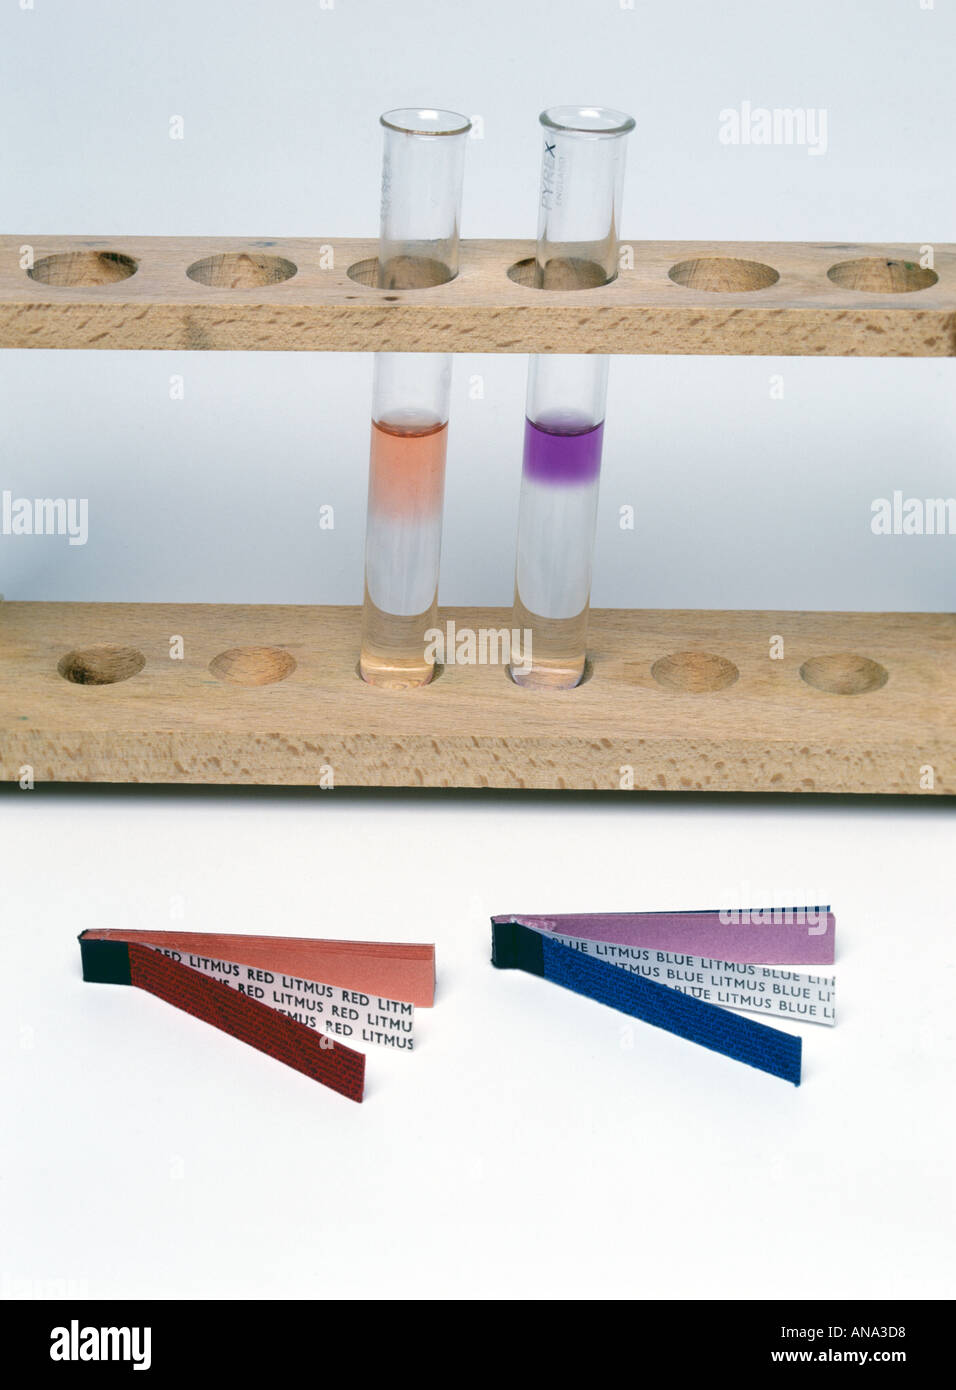 red and blue litmus paper and litmus in test tubes Stock Photo